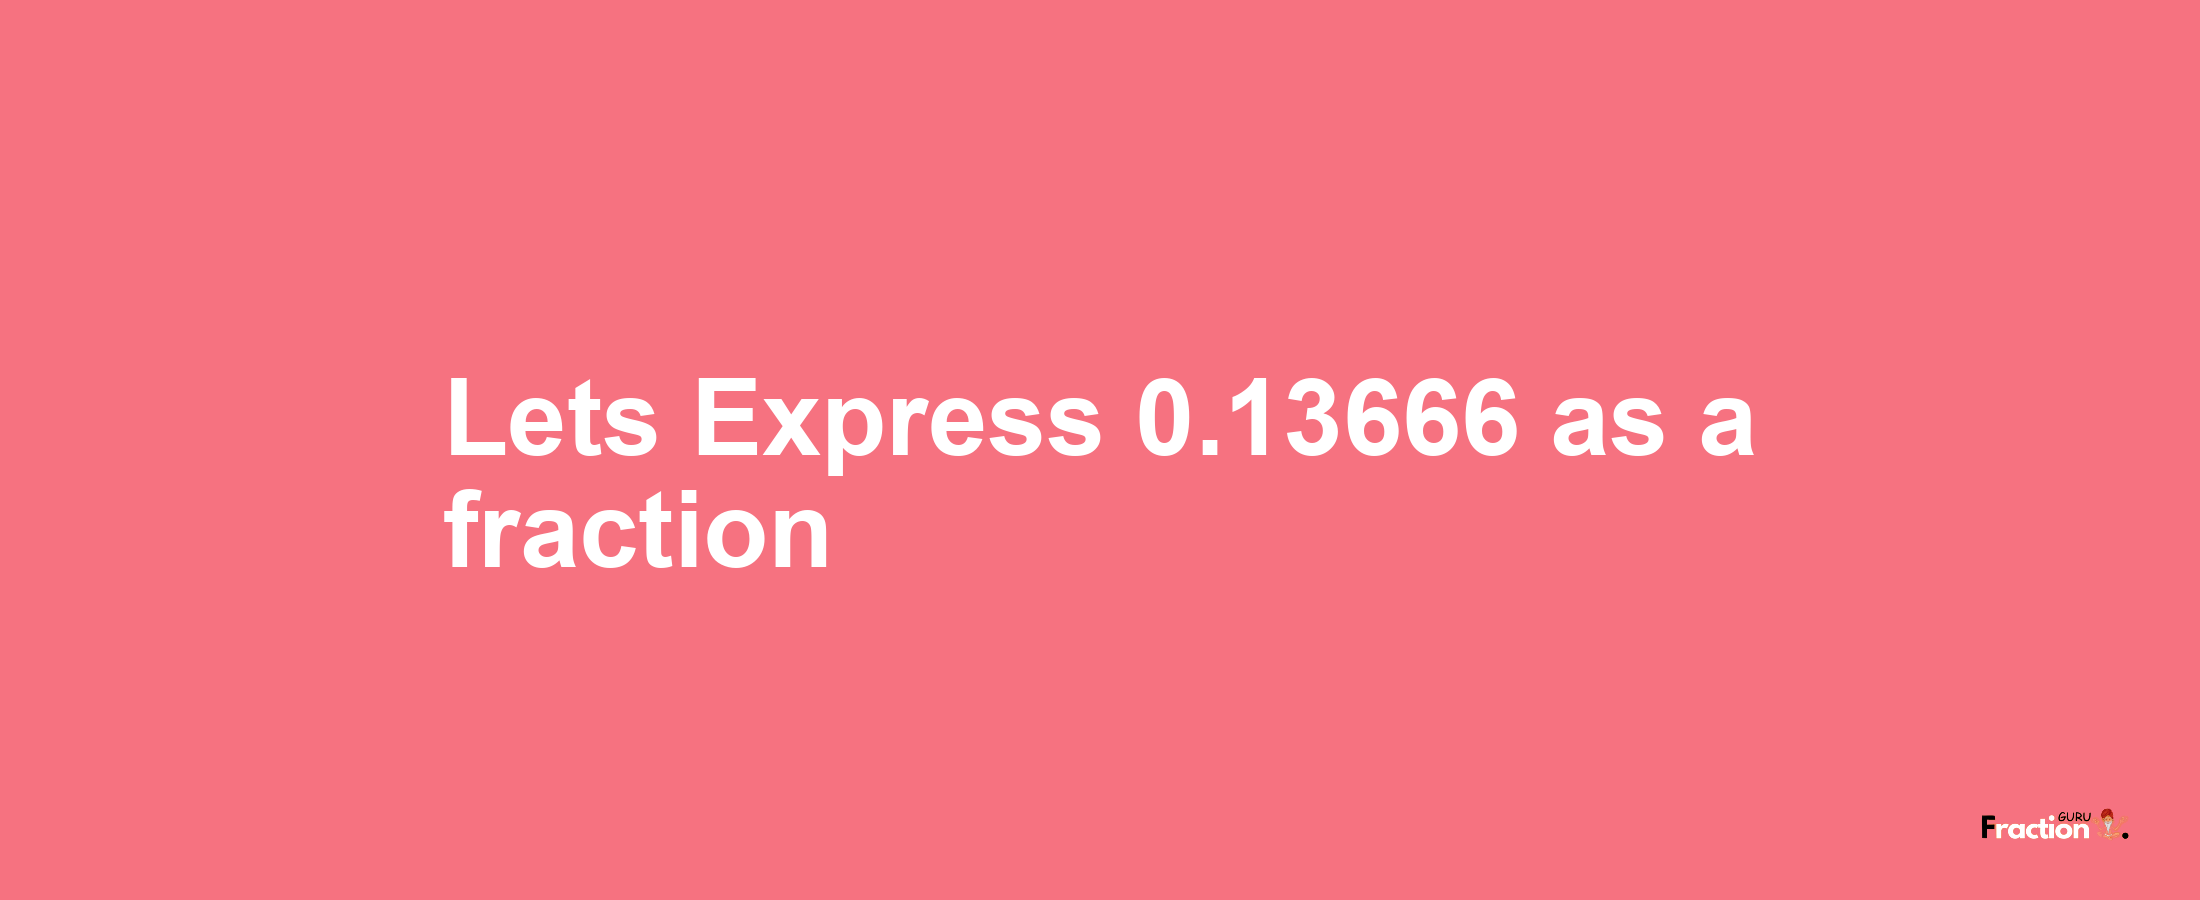 Lets Express 0.13666 as afraction